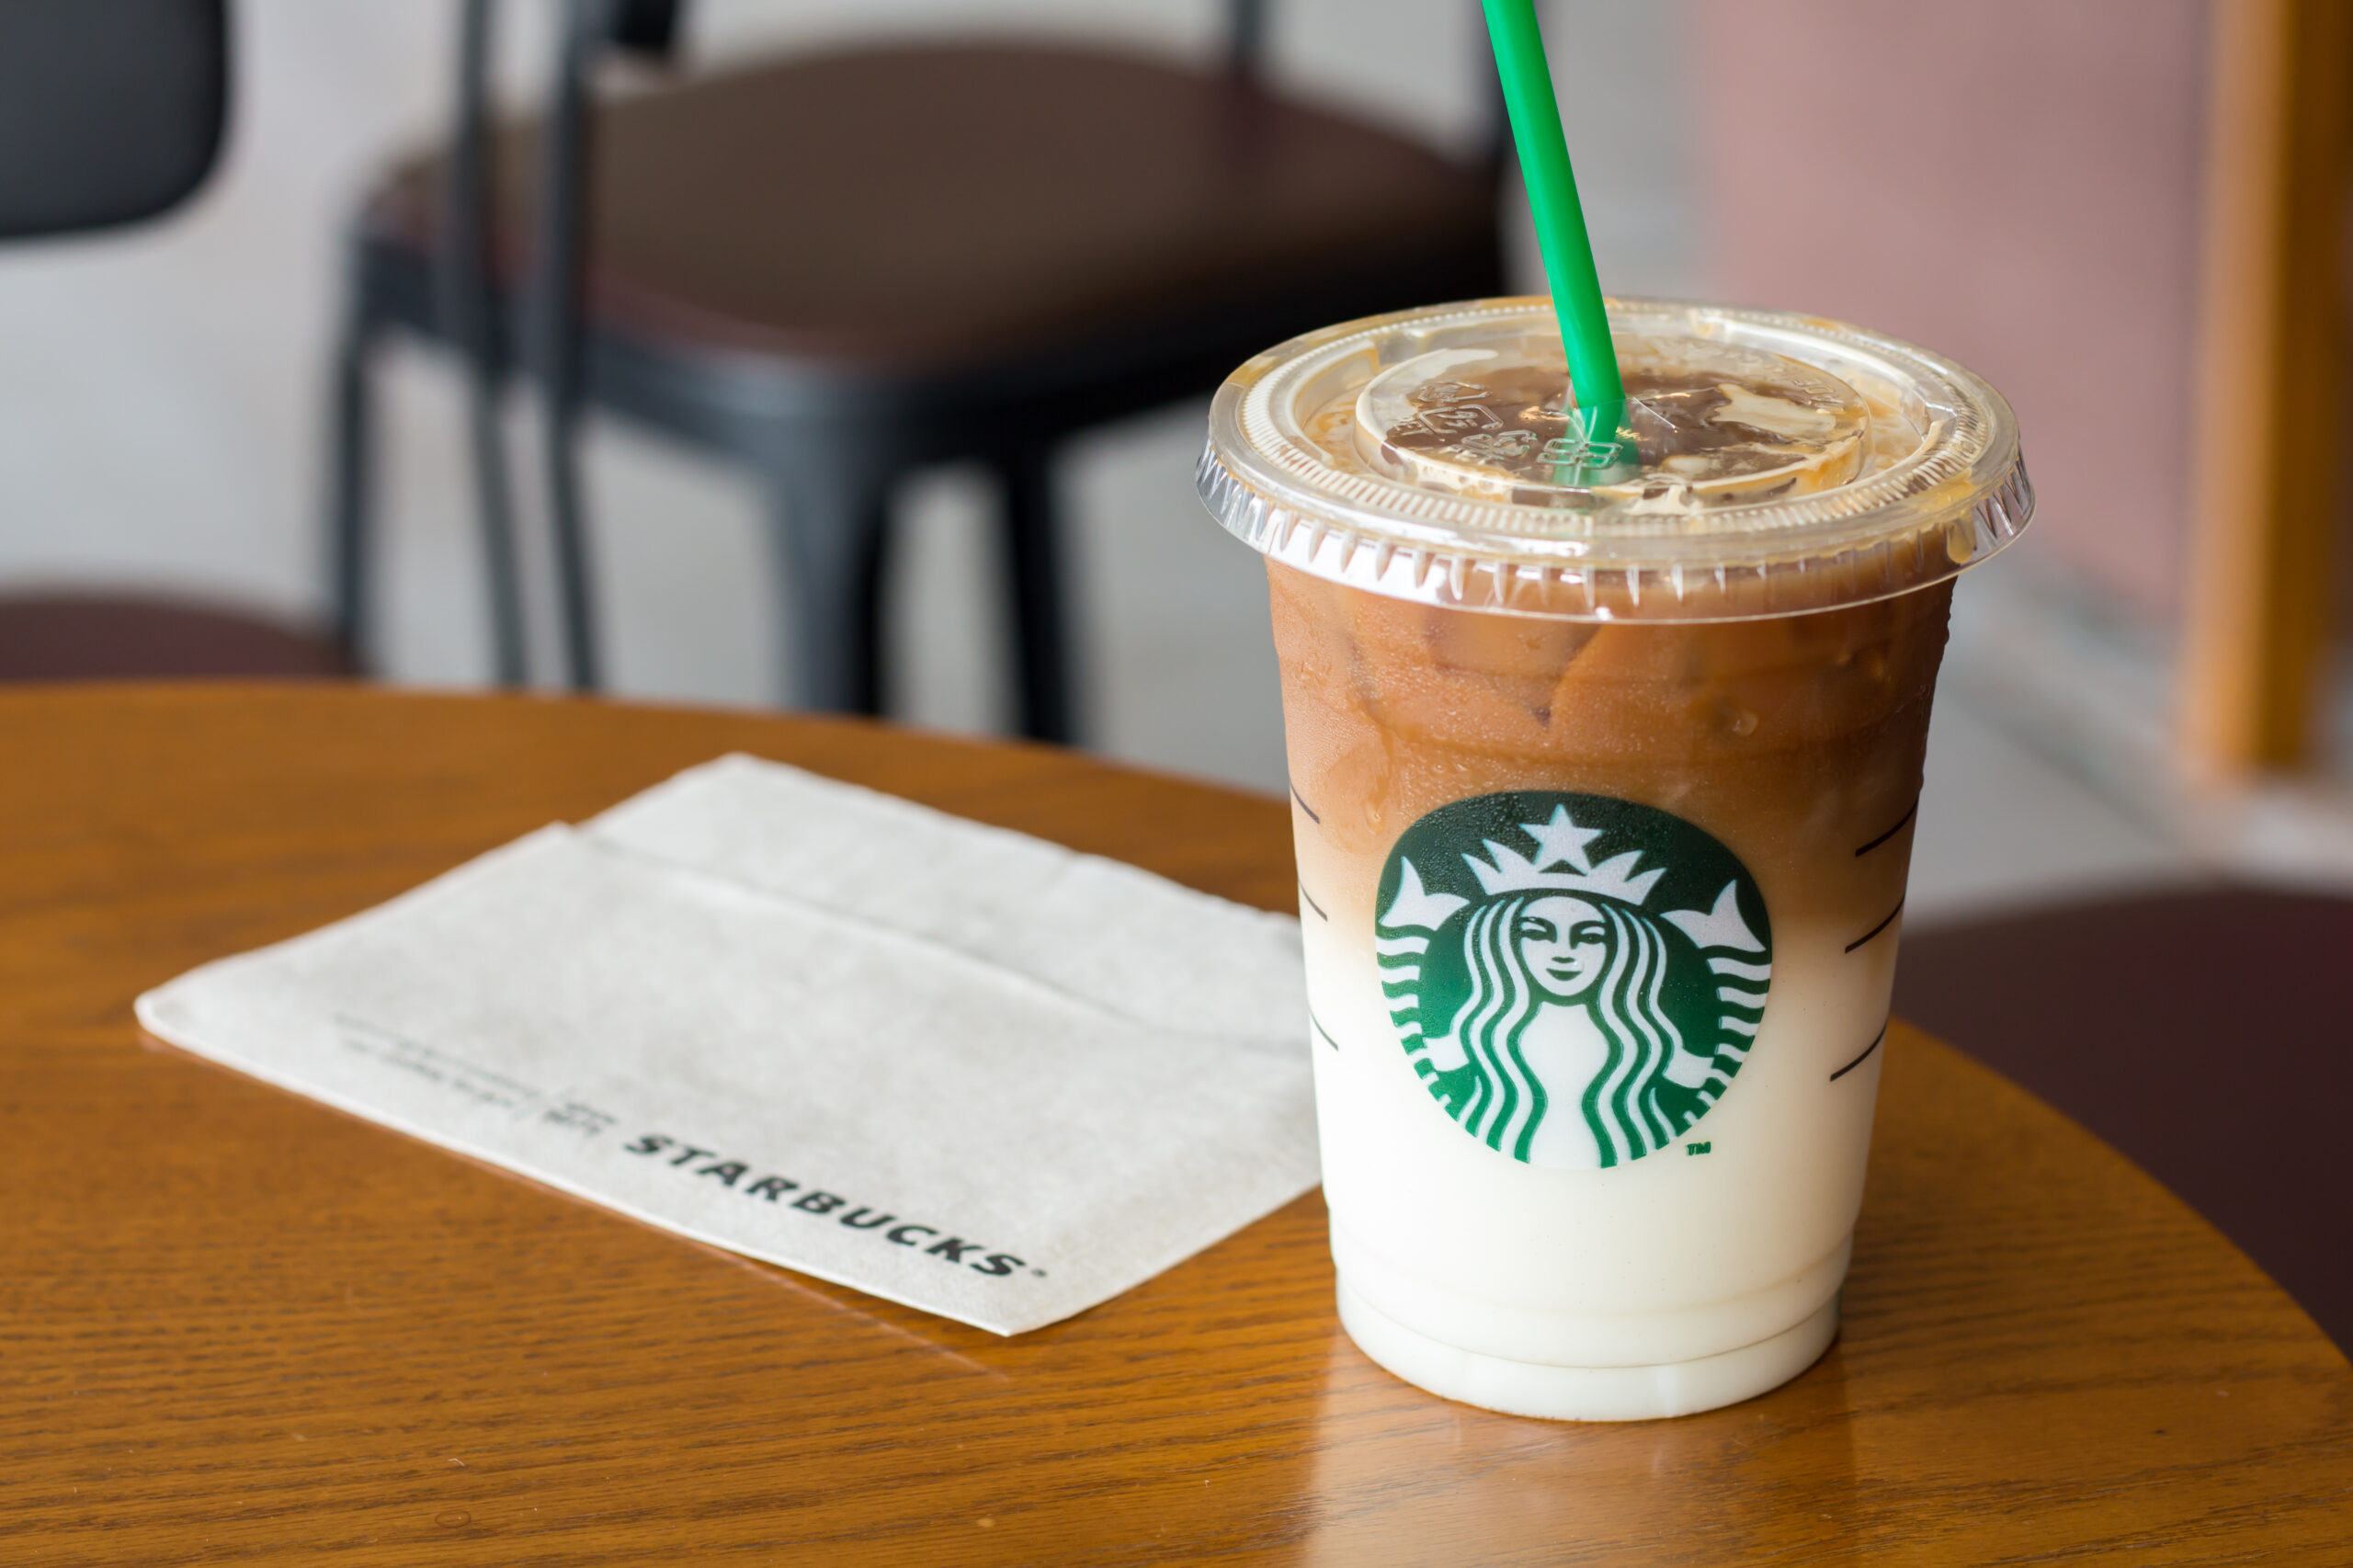 Starbucks Announces ‘Oleato’ Line Of Drinks Made With Spoonfool Of Olive Oil